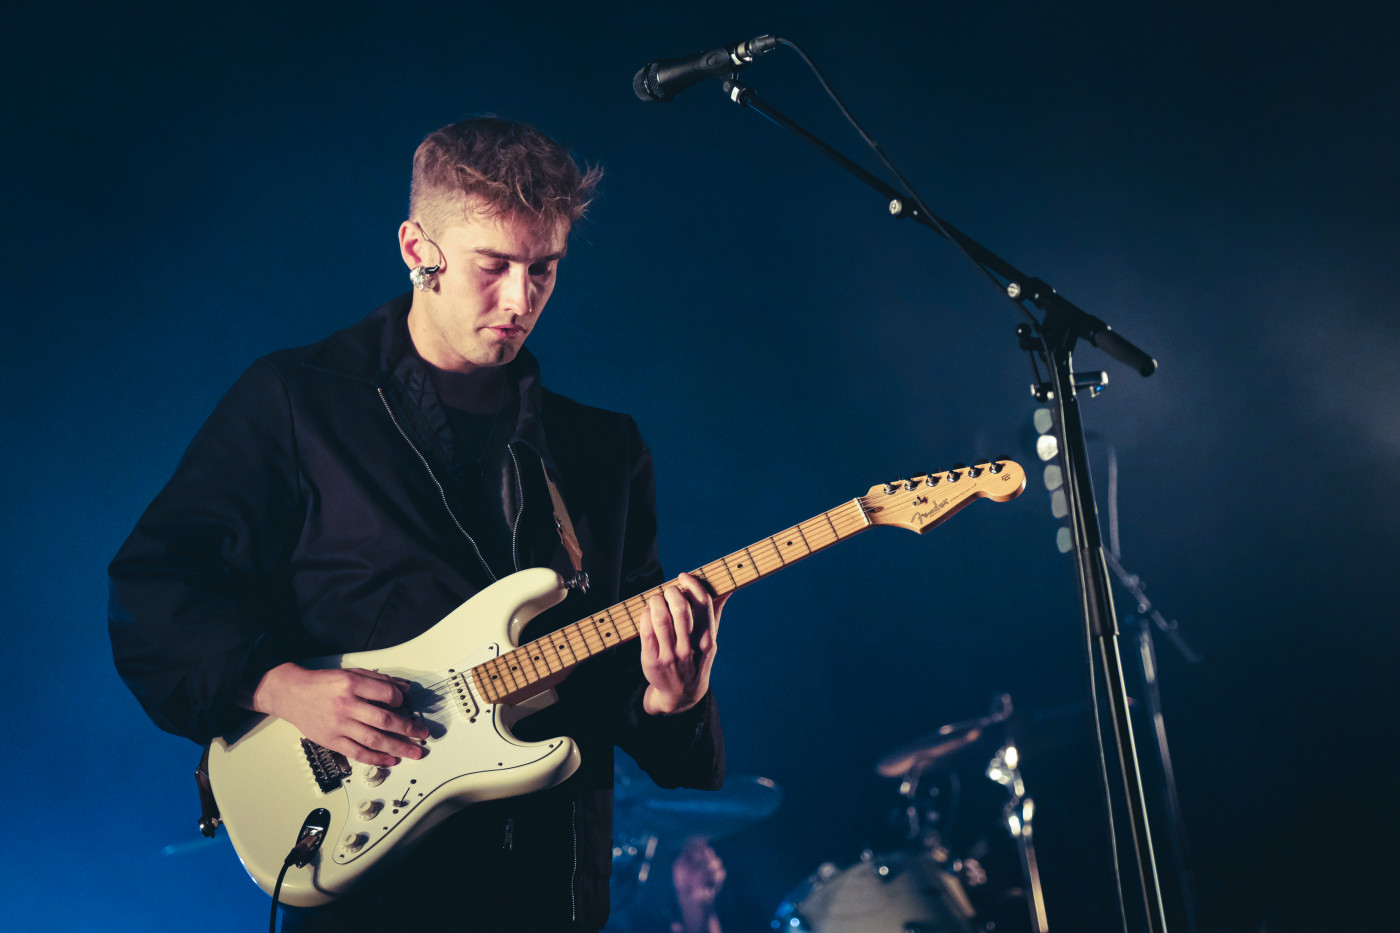 Sam Fender closes the 2021 edition of This Is Tomorrow Festival